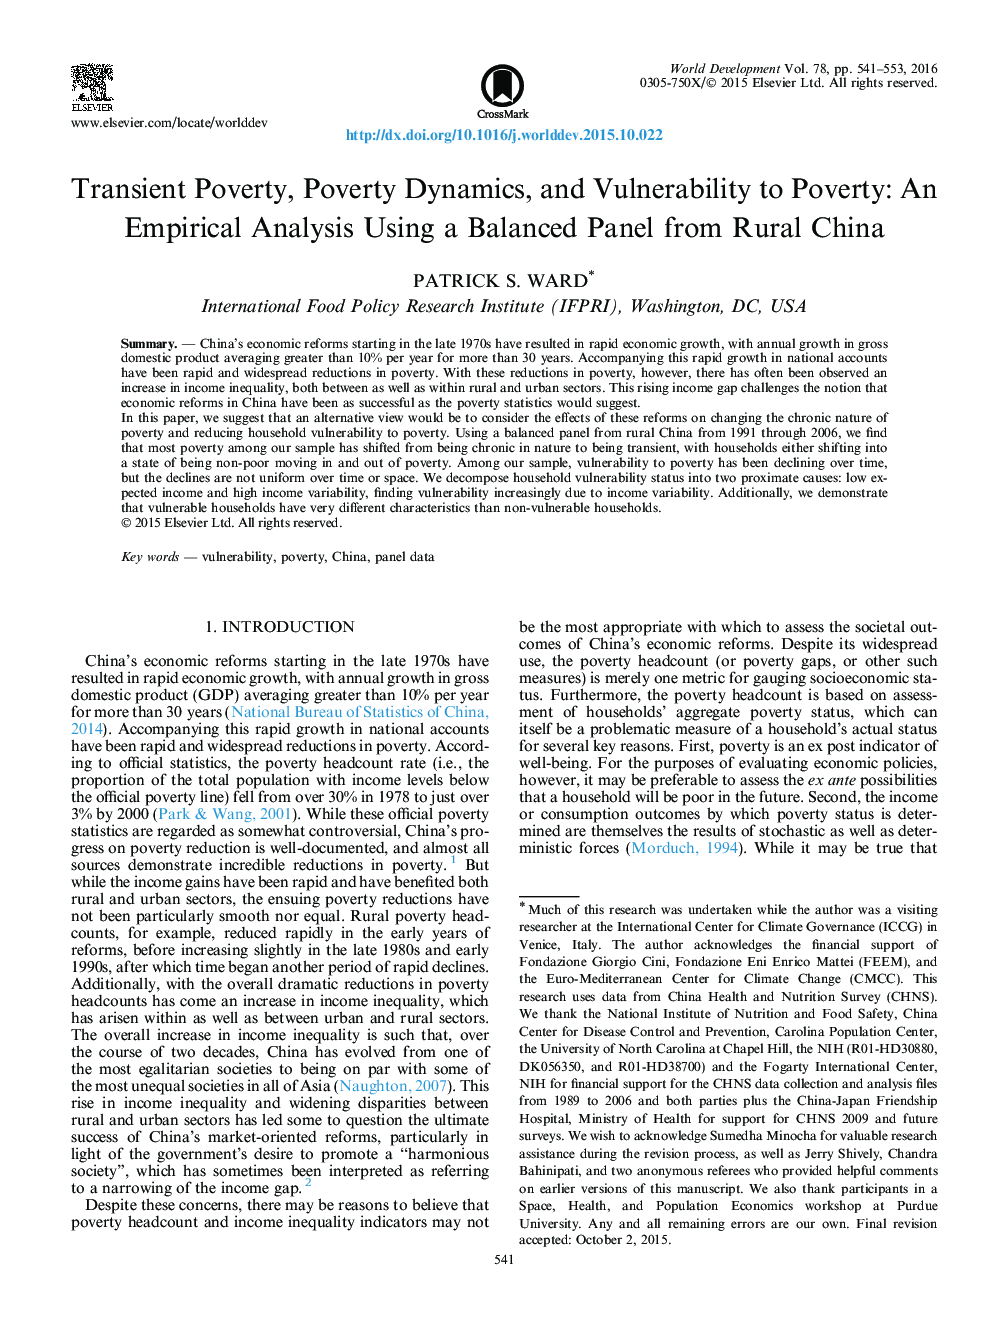 Transient Poverty, Poverty Dynamics, and Vulnerability to Poverty: An Empirical Analysis Using a Balanced Panel from Rural China